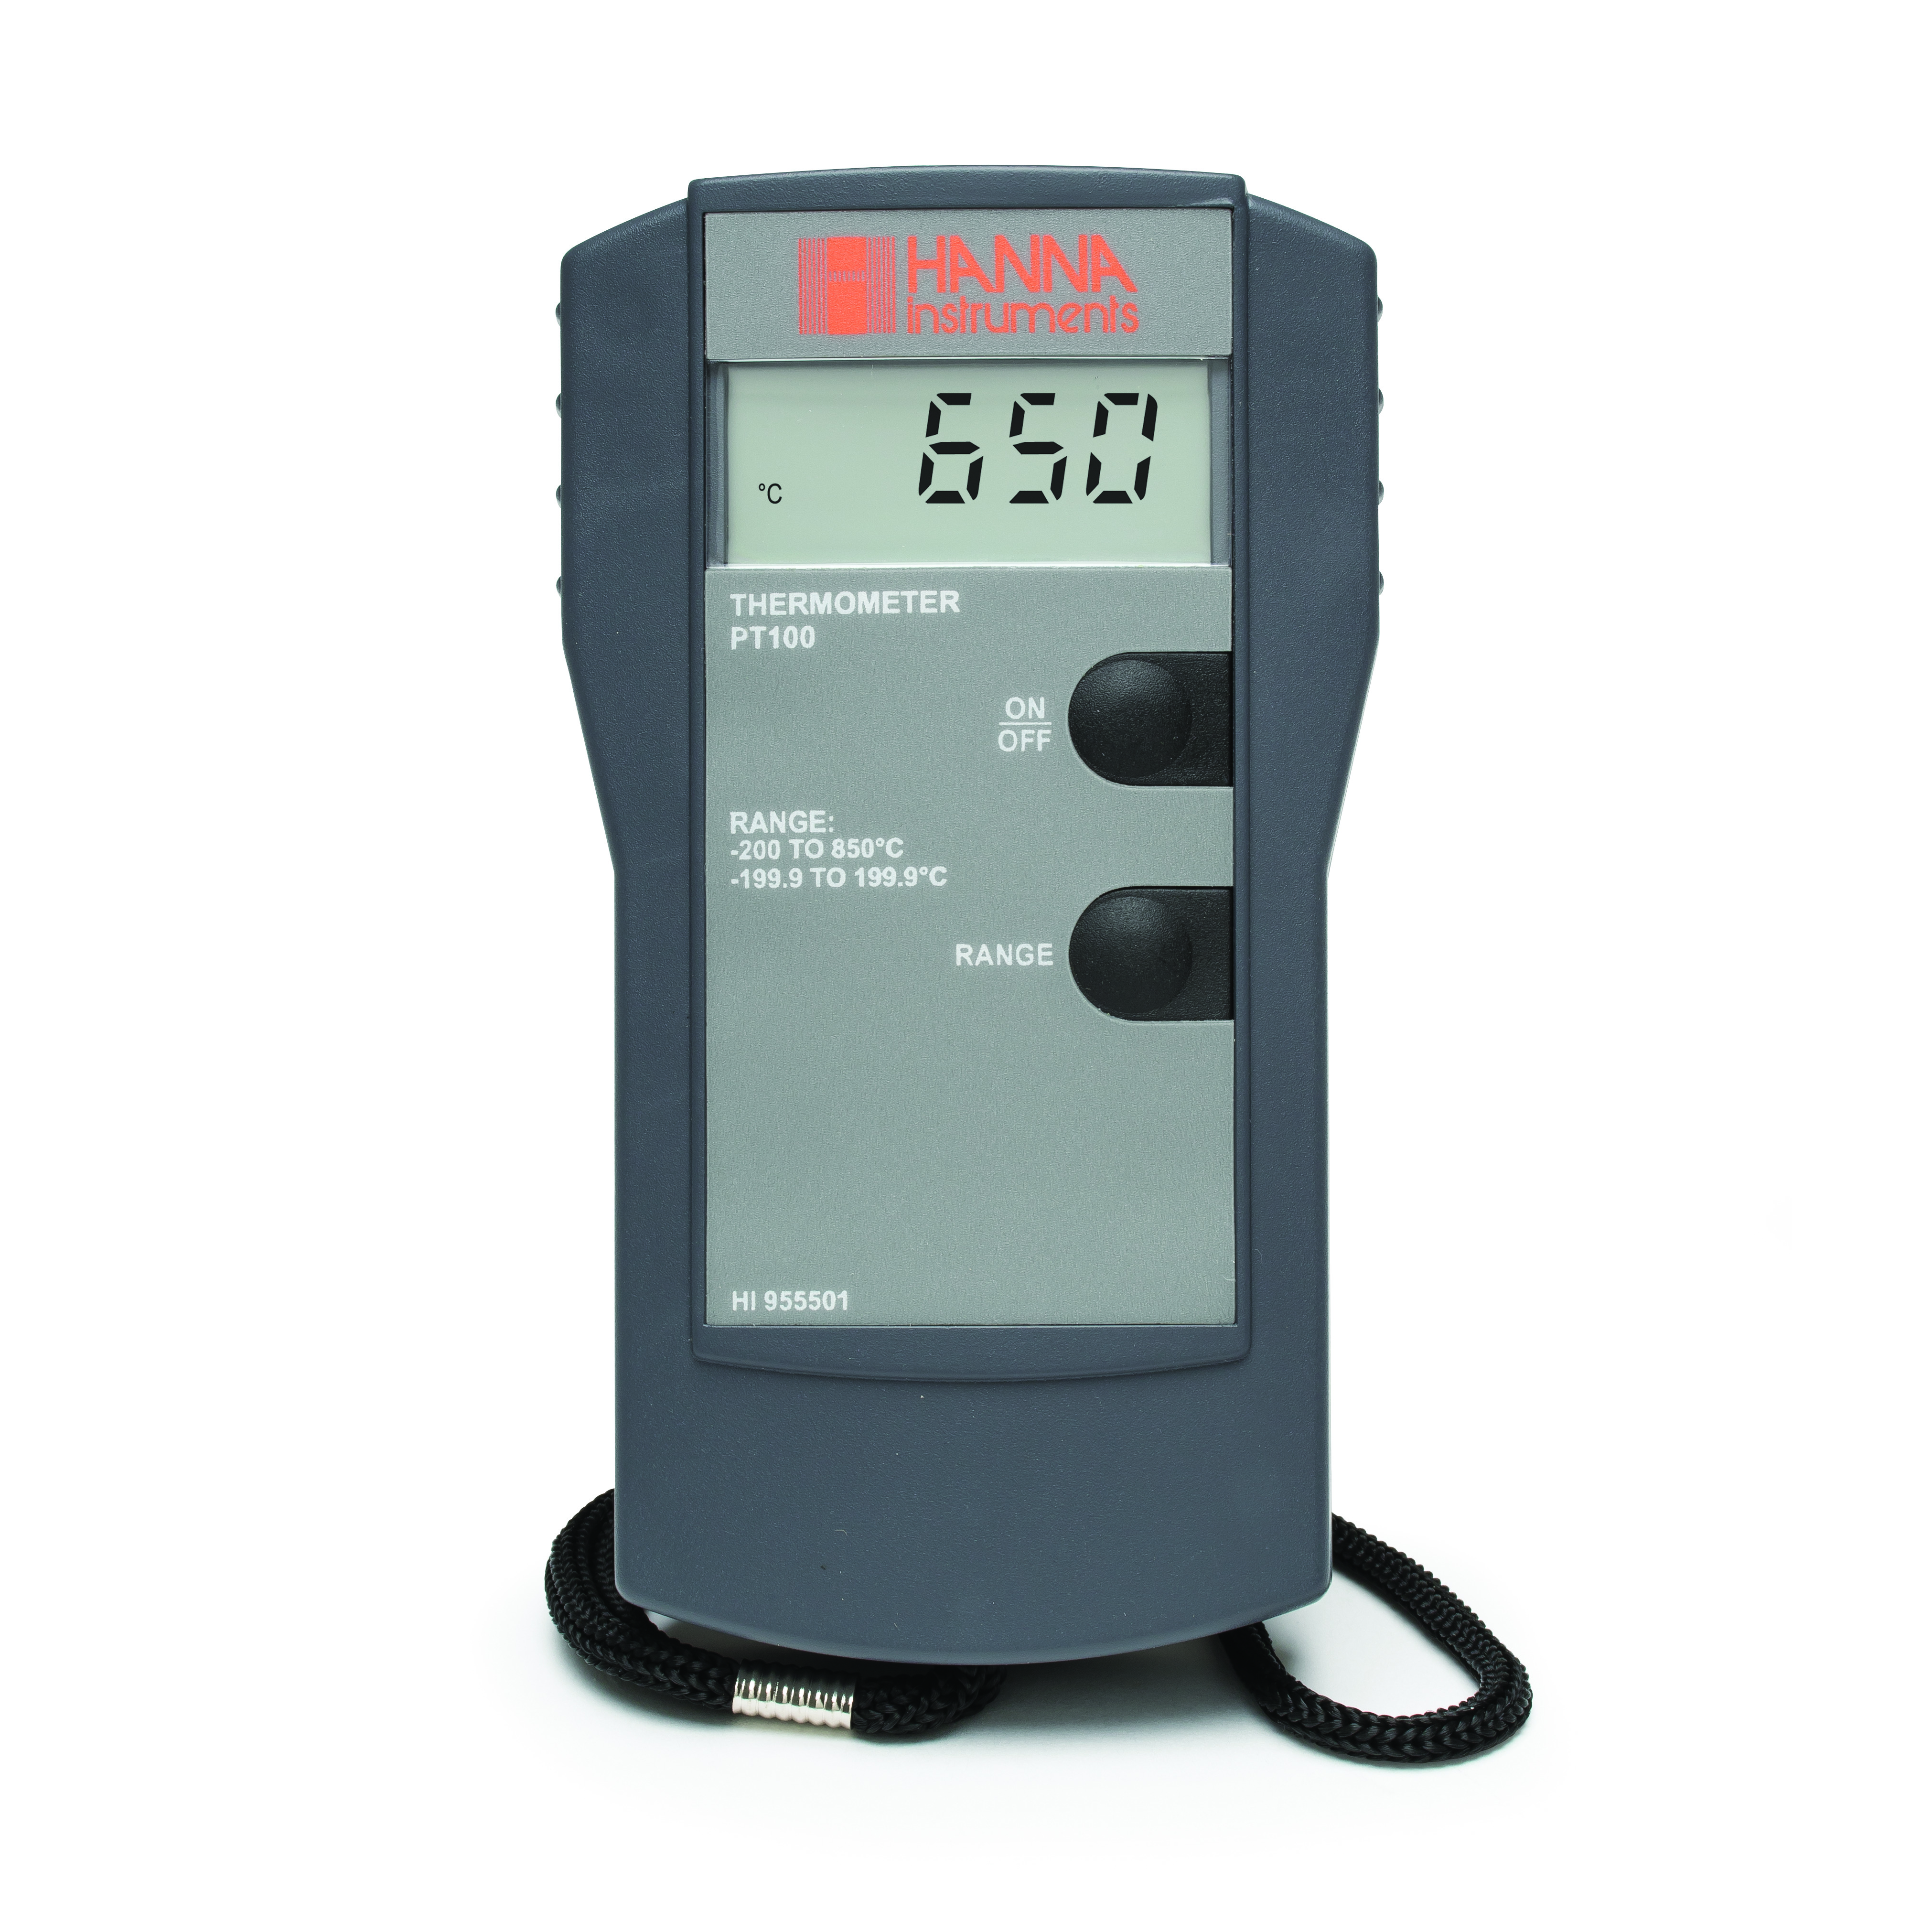 HI955501 4-wire Pt100 Thermometer, 199.9 to 850°C